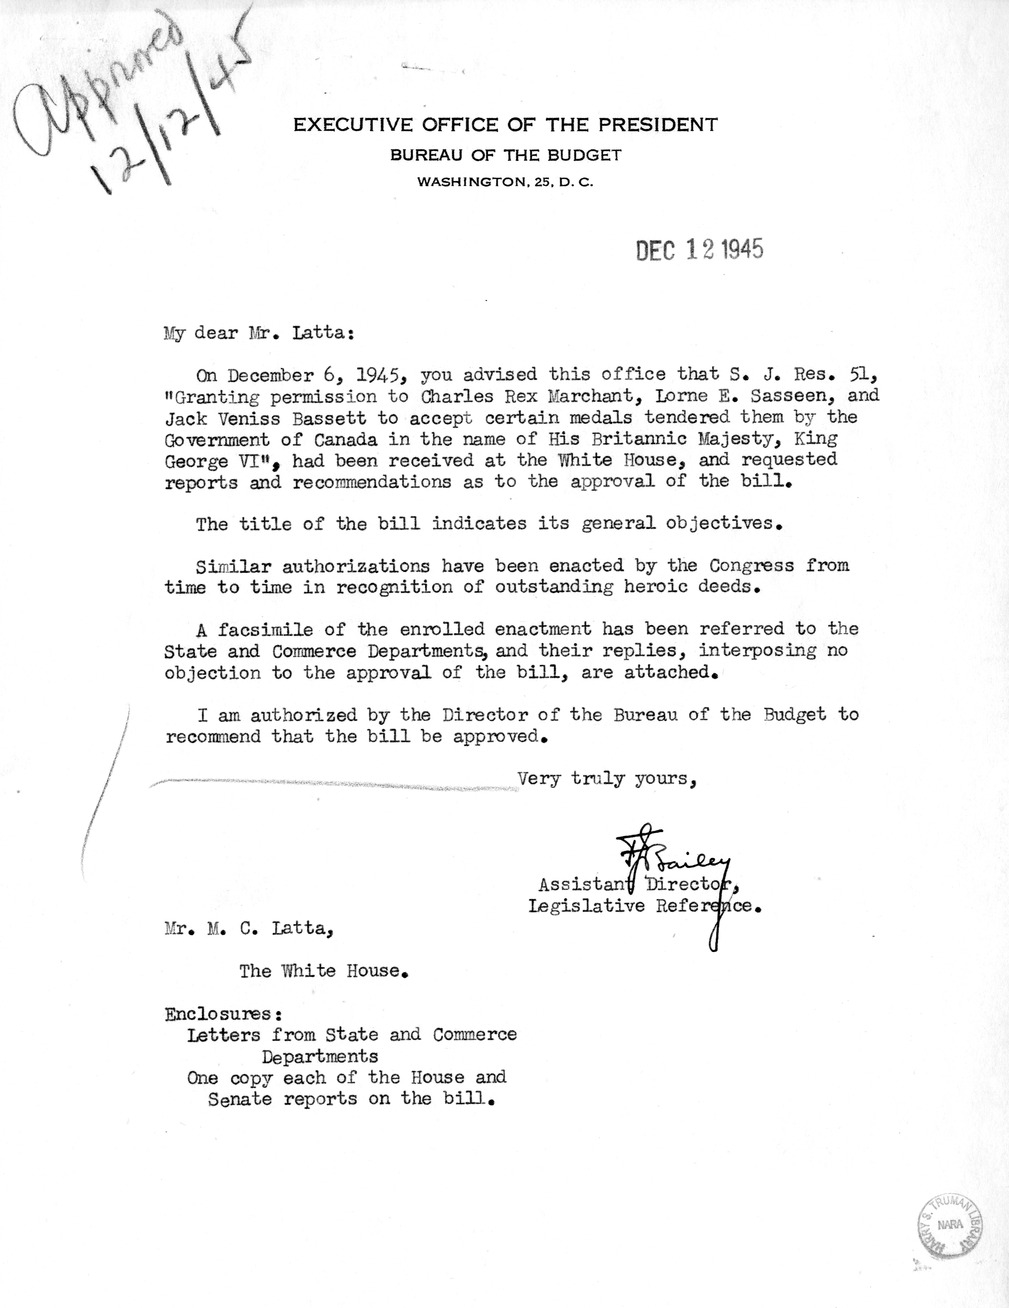 Memorandum from Frederick J. Bailey to M. C. Latta, S.J. Res. 51, Granting Permission to Charles Rex Marchant, Lorne E. Sasseen, and Jack Vaniss Sassett to Accept Certain Medals Tendered Them by the Government of Canada in the Name of His Britannic Majesty, King George VI, with Attachments